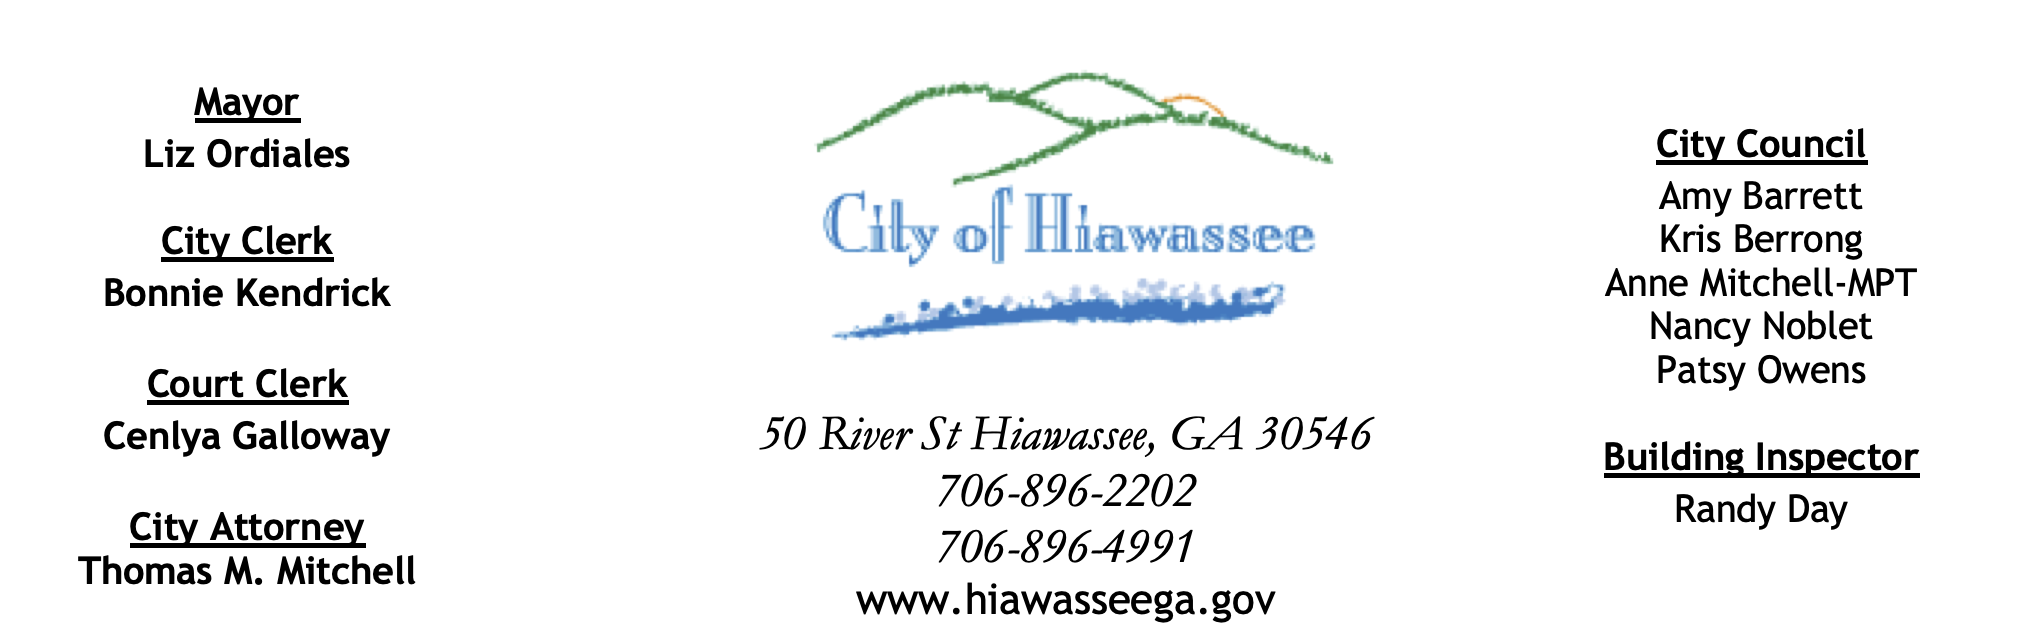 City of Hiawassee Logo, and letterhead with officials